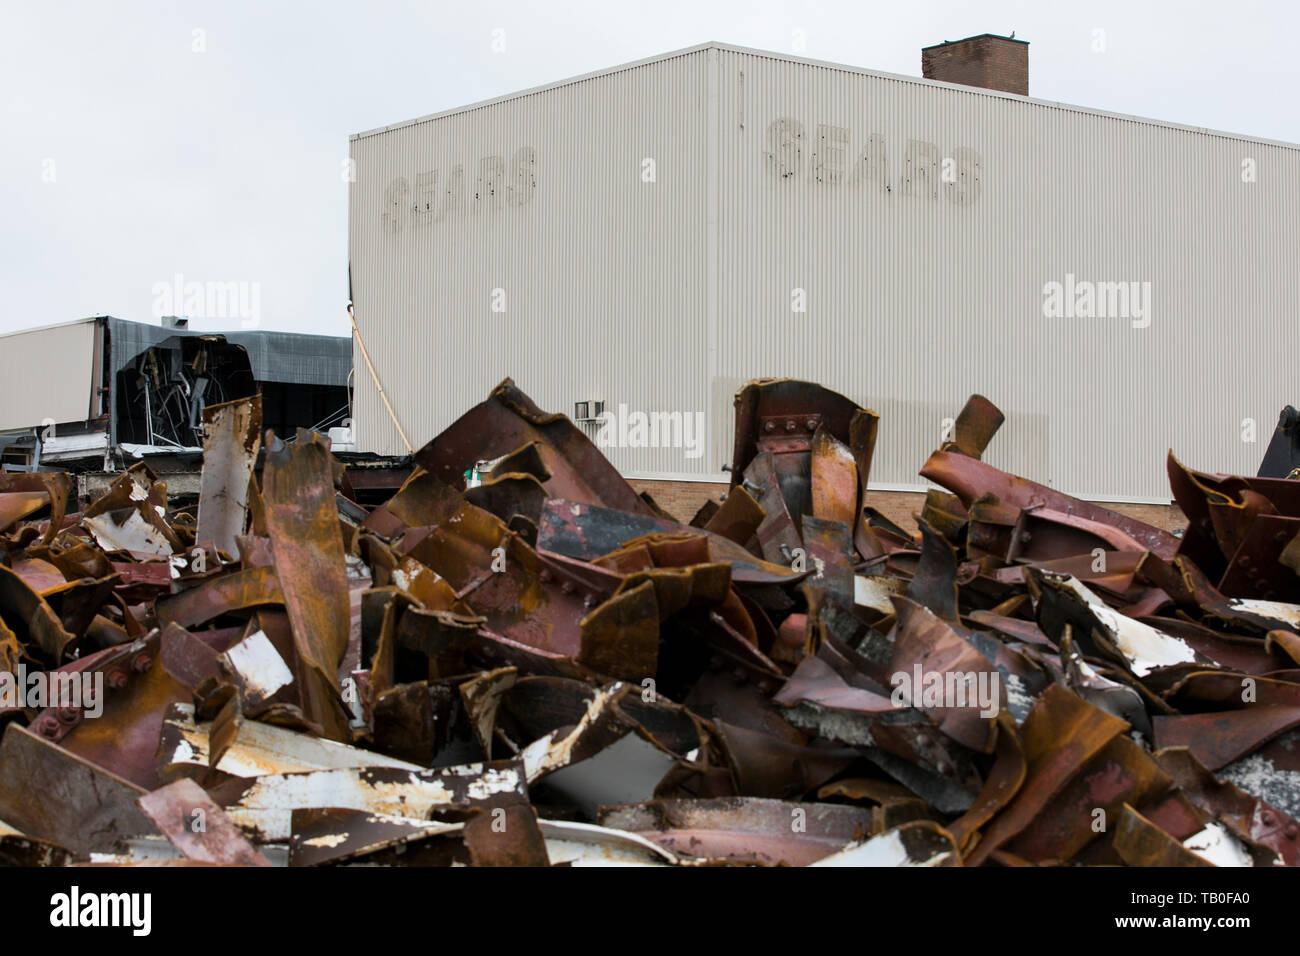 Debris surrounds the site of a closed Sears retail store during its demolition in Ottawa, Ontario, Canada, on April 20, 2019. Stock Photo